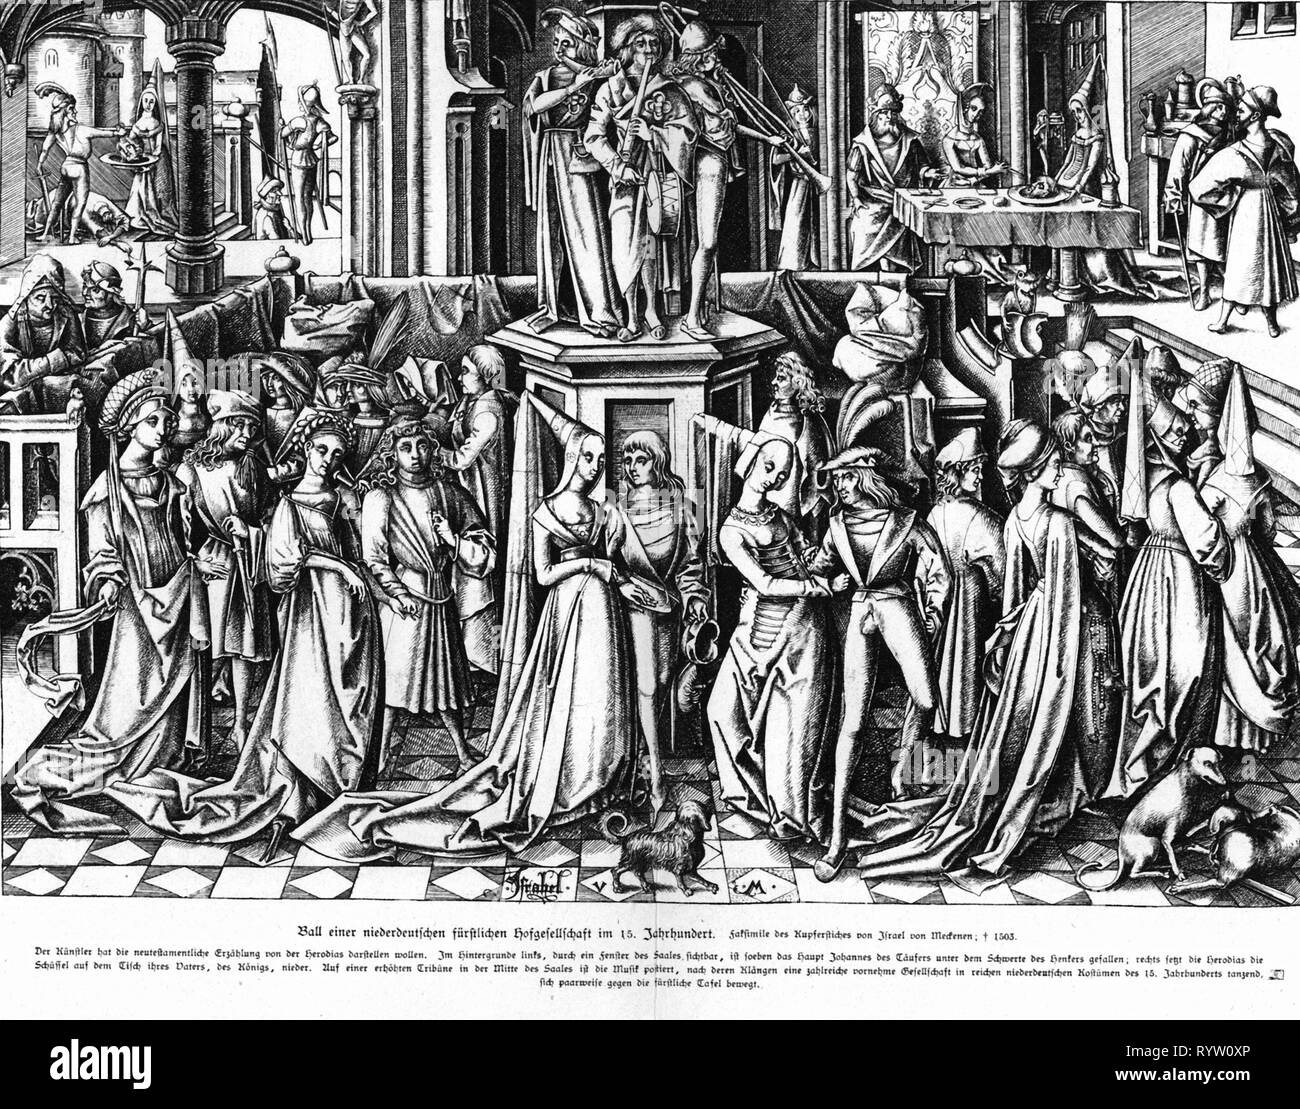 festivities, balls and parties, ball of a Low German baronial society, 15th century, after copper engraving, by Israel van Meckenem the Younger (circa 1440 - 1503), wood engraving, 15th century, graphic, graphics, Middle Ages, medieval, mediaeval, dancer, dancers, dances, dance, dancing, society, societies, courtly, aristocracy, aristocracies, aristocrat, clothes, fashion, dress, dresses, bonnet, bonnets, hat, hats, doublet, jerkin, beret, berets, musician, musicians, make music, play music, making music, playing music, makes music, plays music, , Additional-Rights-Clearance-Info-Not-Available Stock Photo